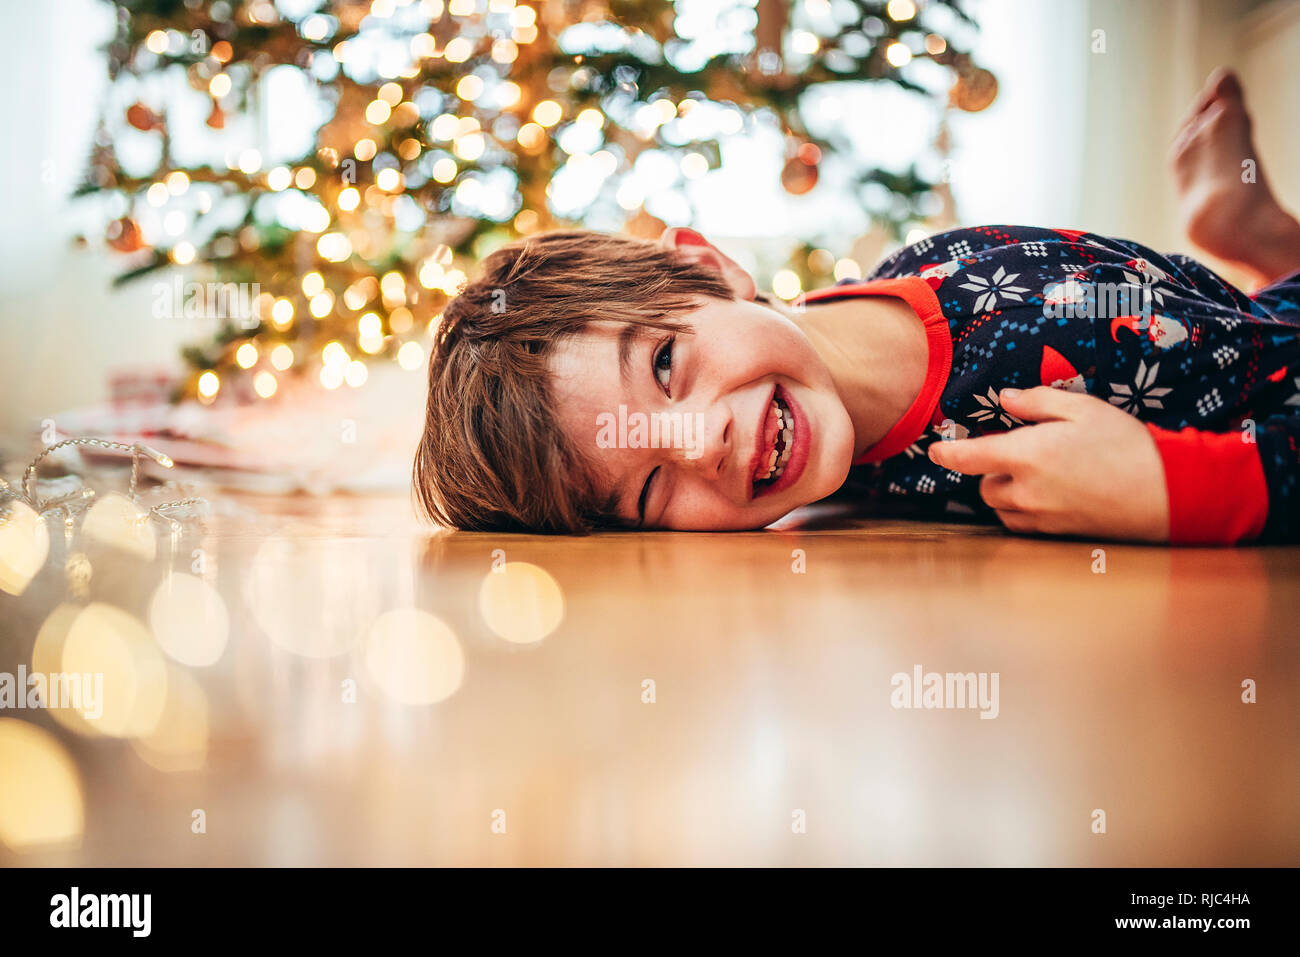 Boy lying on the floor in front of a Christmas tree laughing Stock Photo